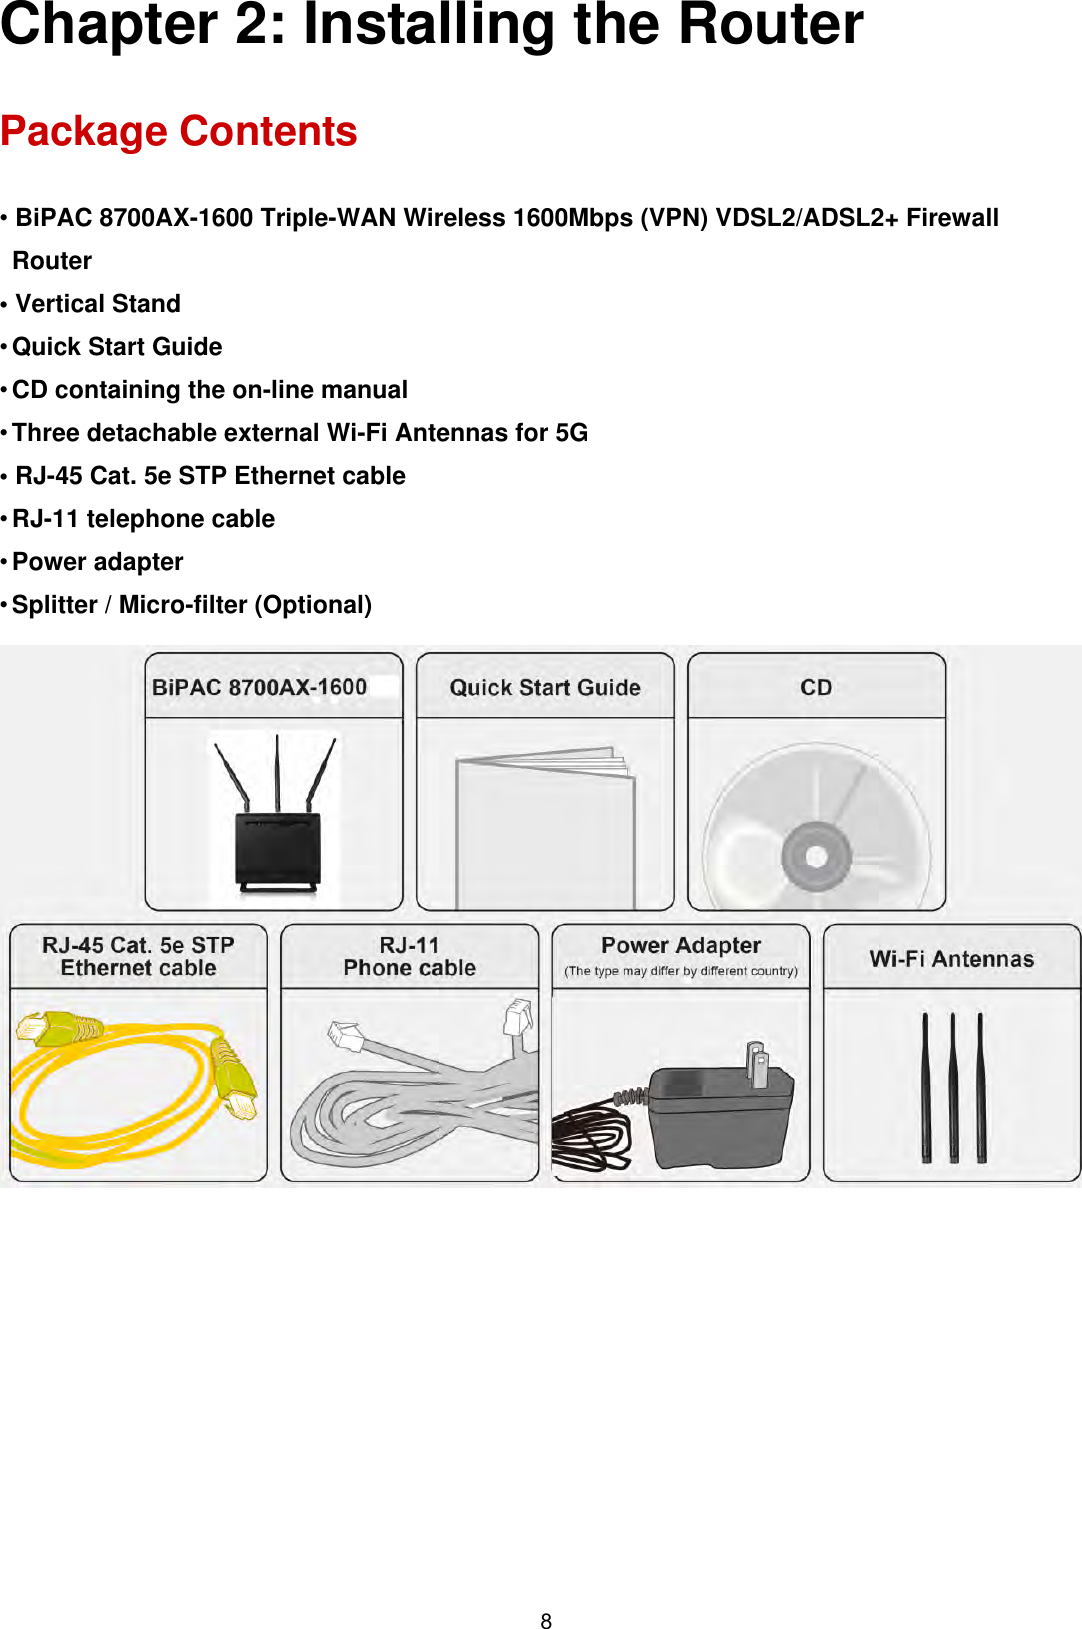 8Chapter 2: Installing the Router Package Contents • BiPAC 8700AX-1600 Triple-WAN Wireless 1600Mbps (VPN) VDSL2/ADSL2+ FirewallRouter• Vertical Stand•Quick Start Guide•CD containing the on-line manual•Three detachable external Wi-Fi Antennas for 5G• RJ-45 Cat. 5e STP Ethernet cable•RJ-11 telephone cable•Power adapter•Splitter / Micro-filter (Optional)